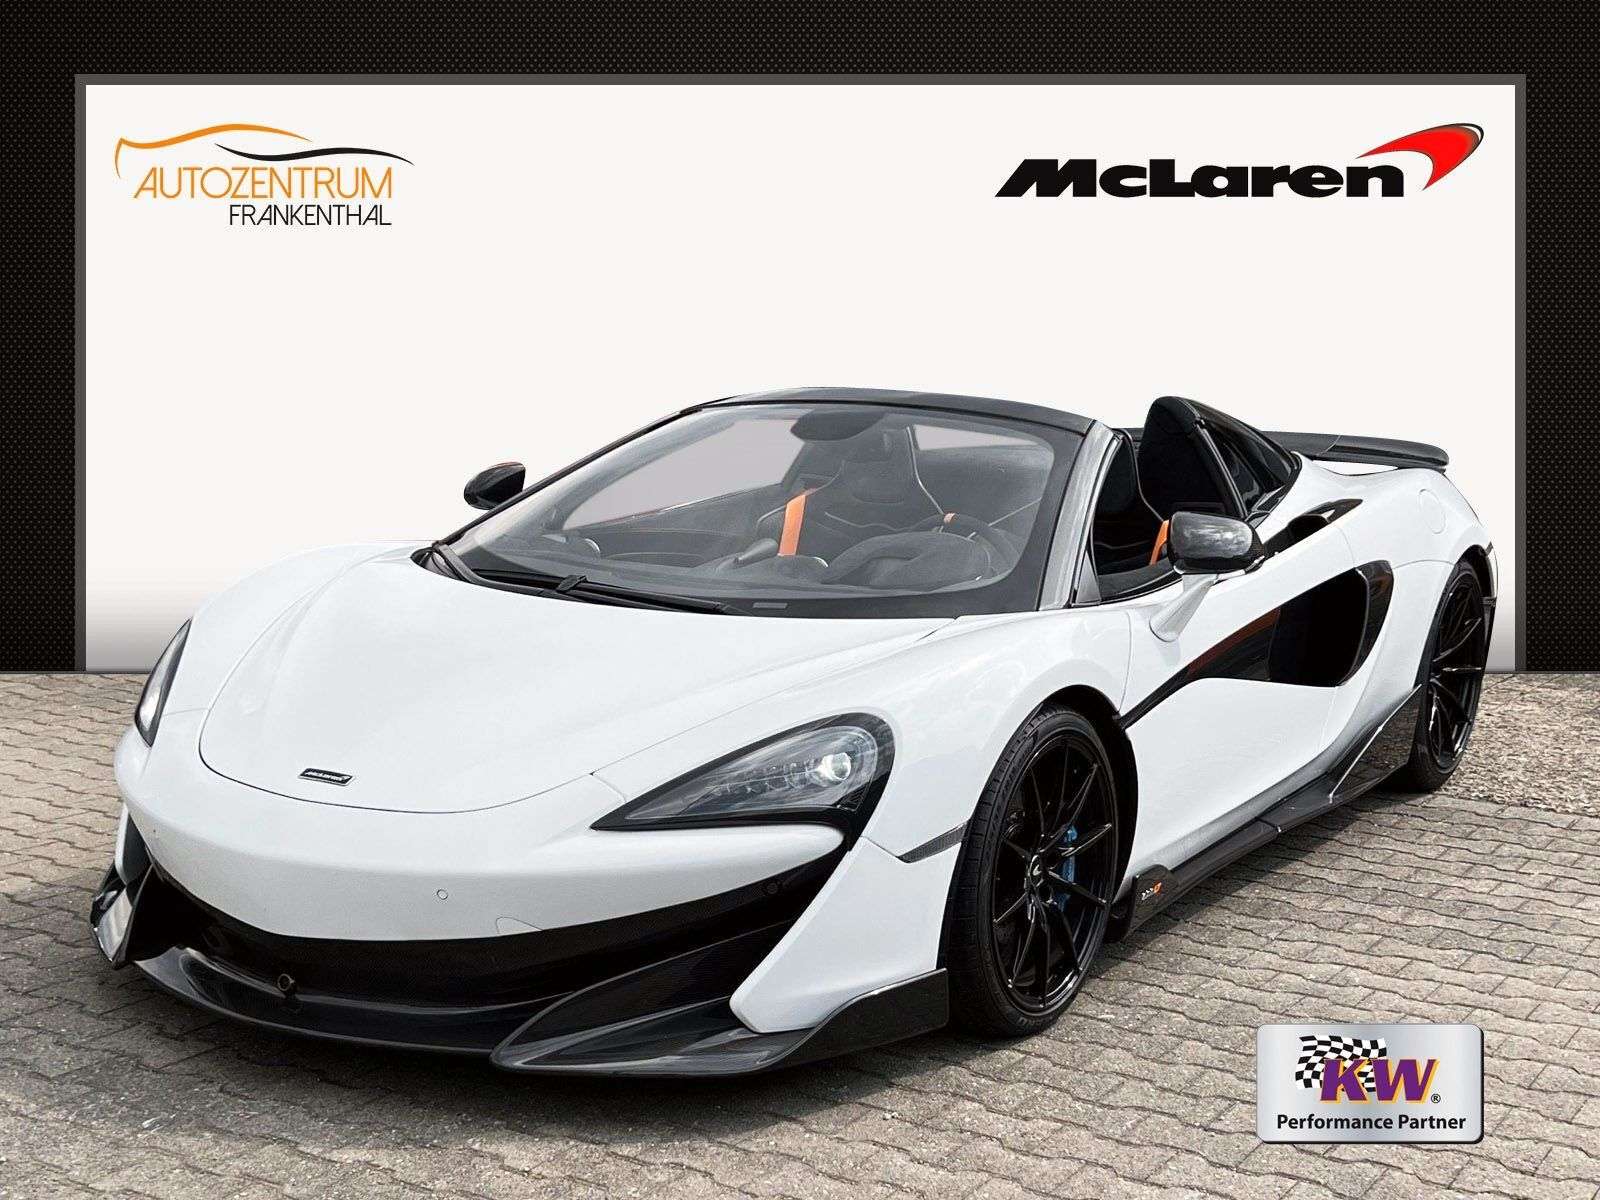 McLaren 600LT Convertible in White used in Frankenthal for € 323,600.-